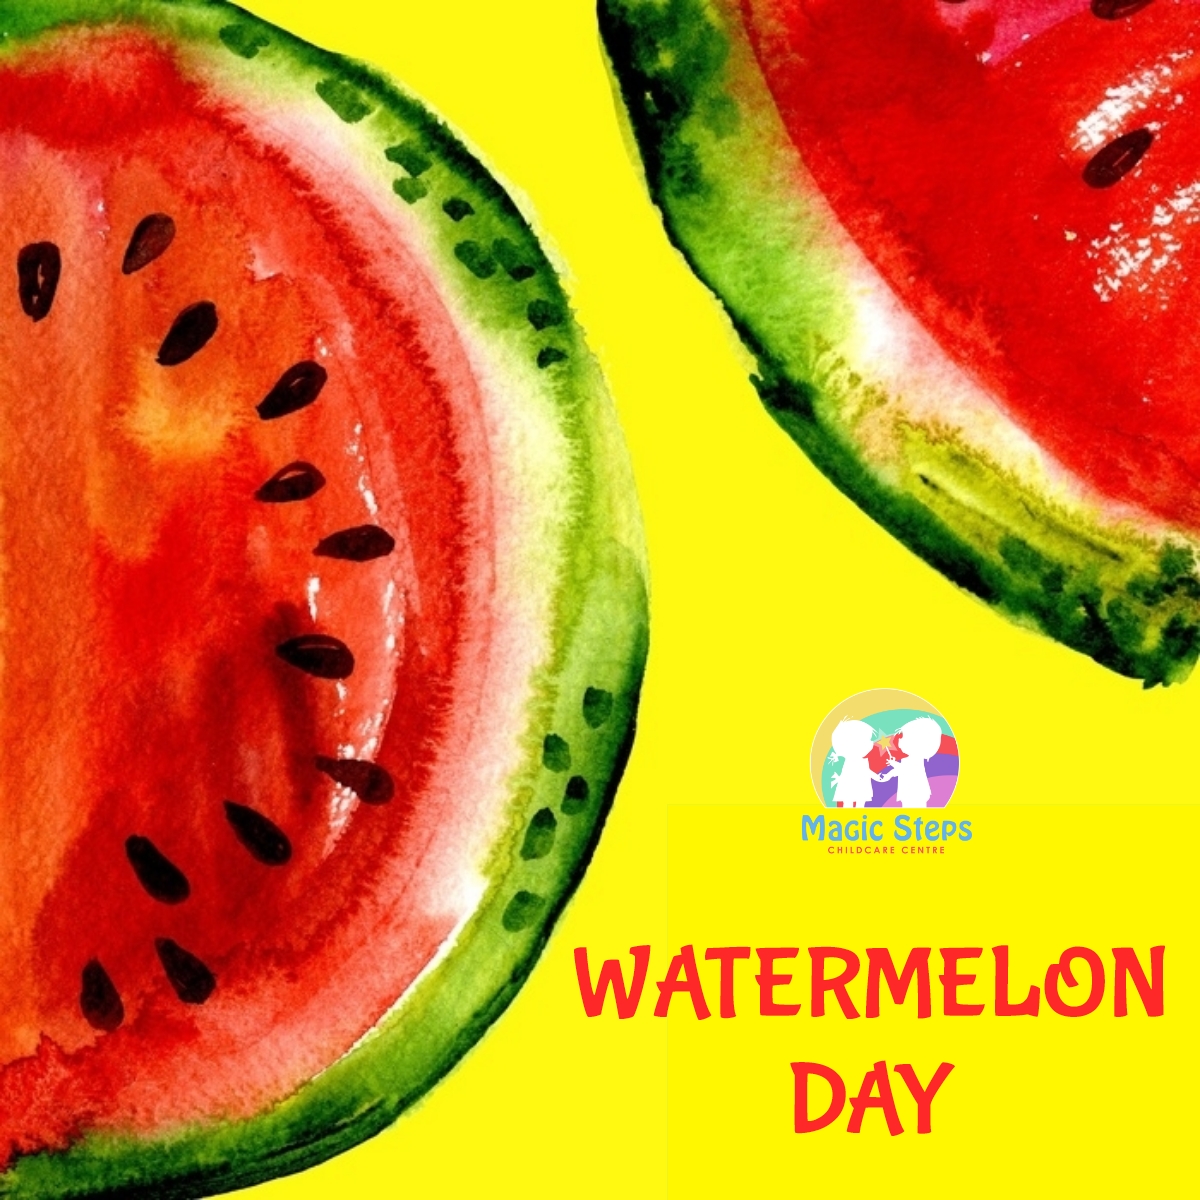 Watermelon Day- Wednesday 4th August